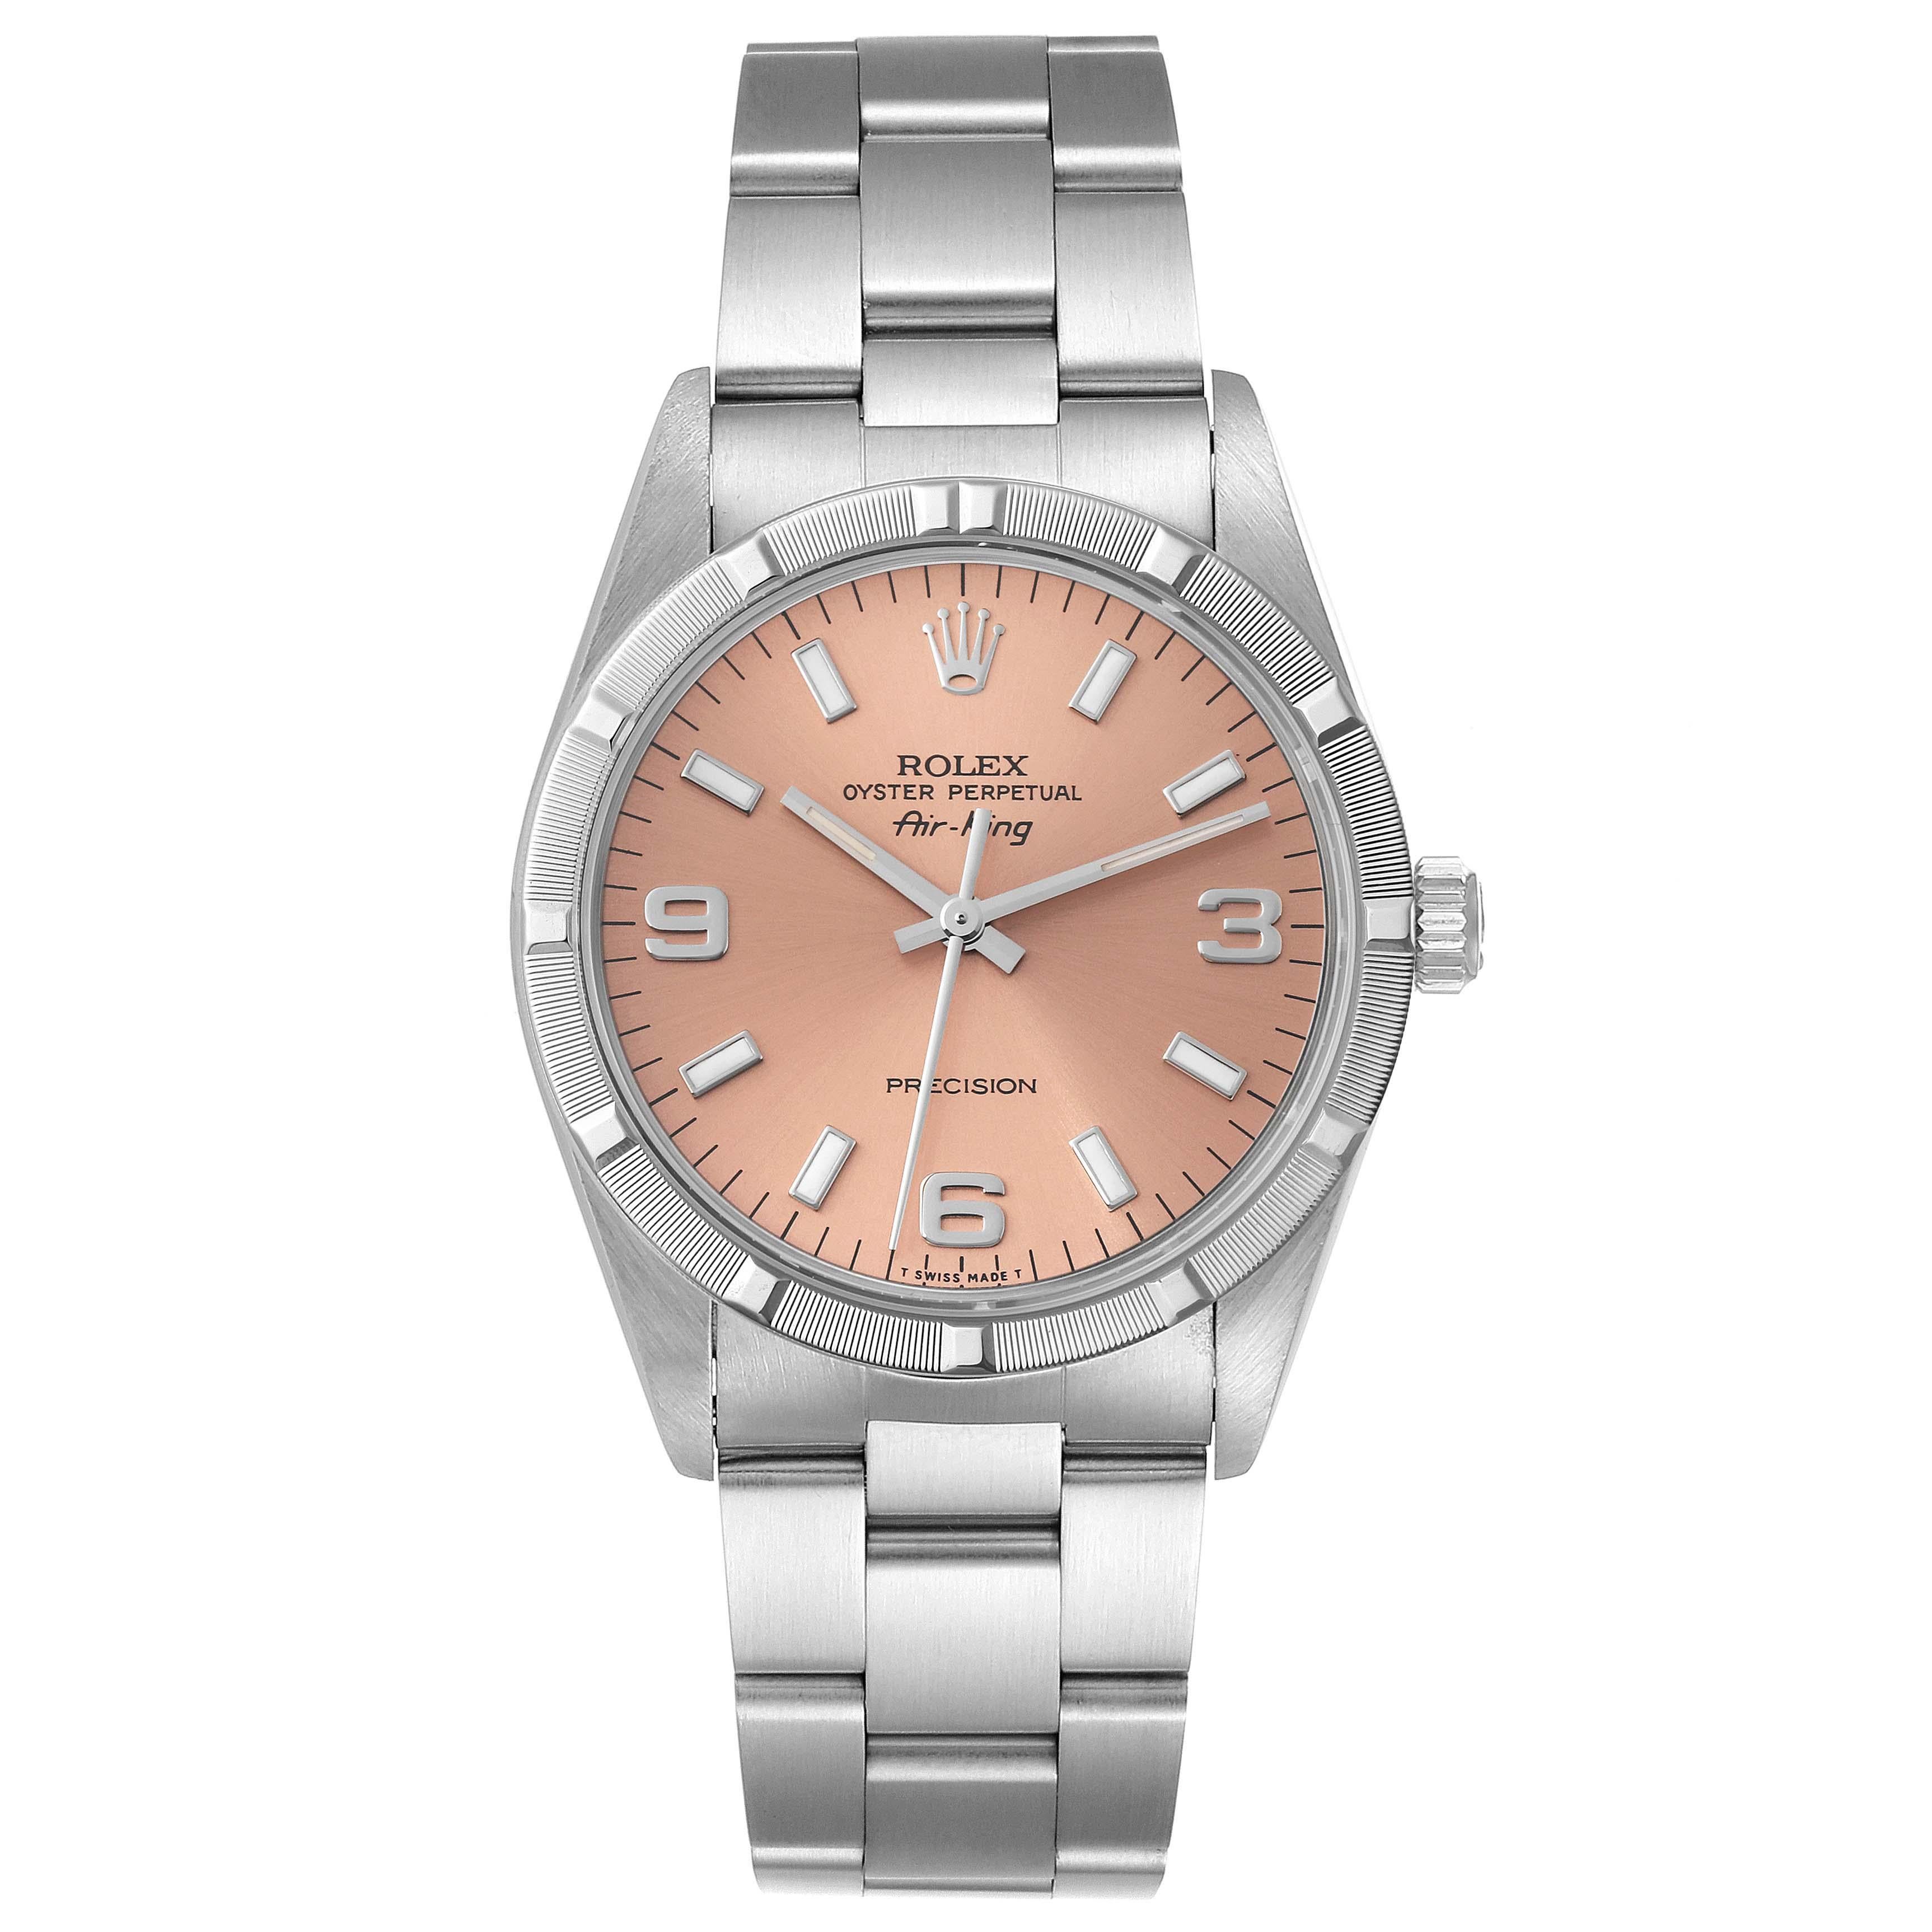 Rolex Air King 34 Salmon Dial Engine Turned Bezel Steel Mens Watch 14010. Automatic self-winding movement. Stainless steel case 34 mm in diameter. Rolex logo on the crown. Stainless steel engine turned bezel. Scratch resistant sapphire crystal.